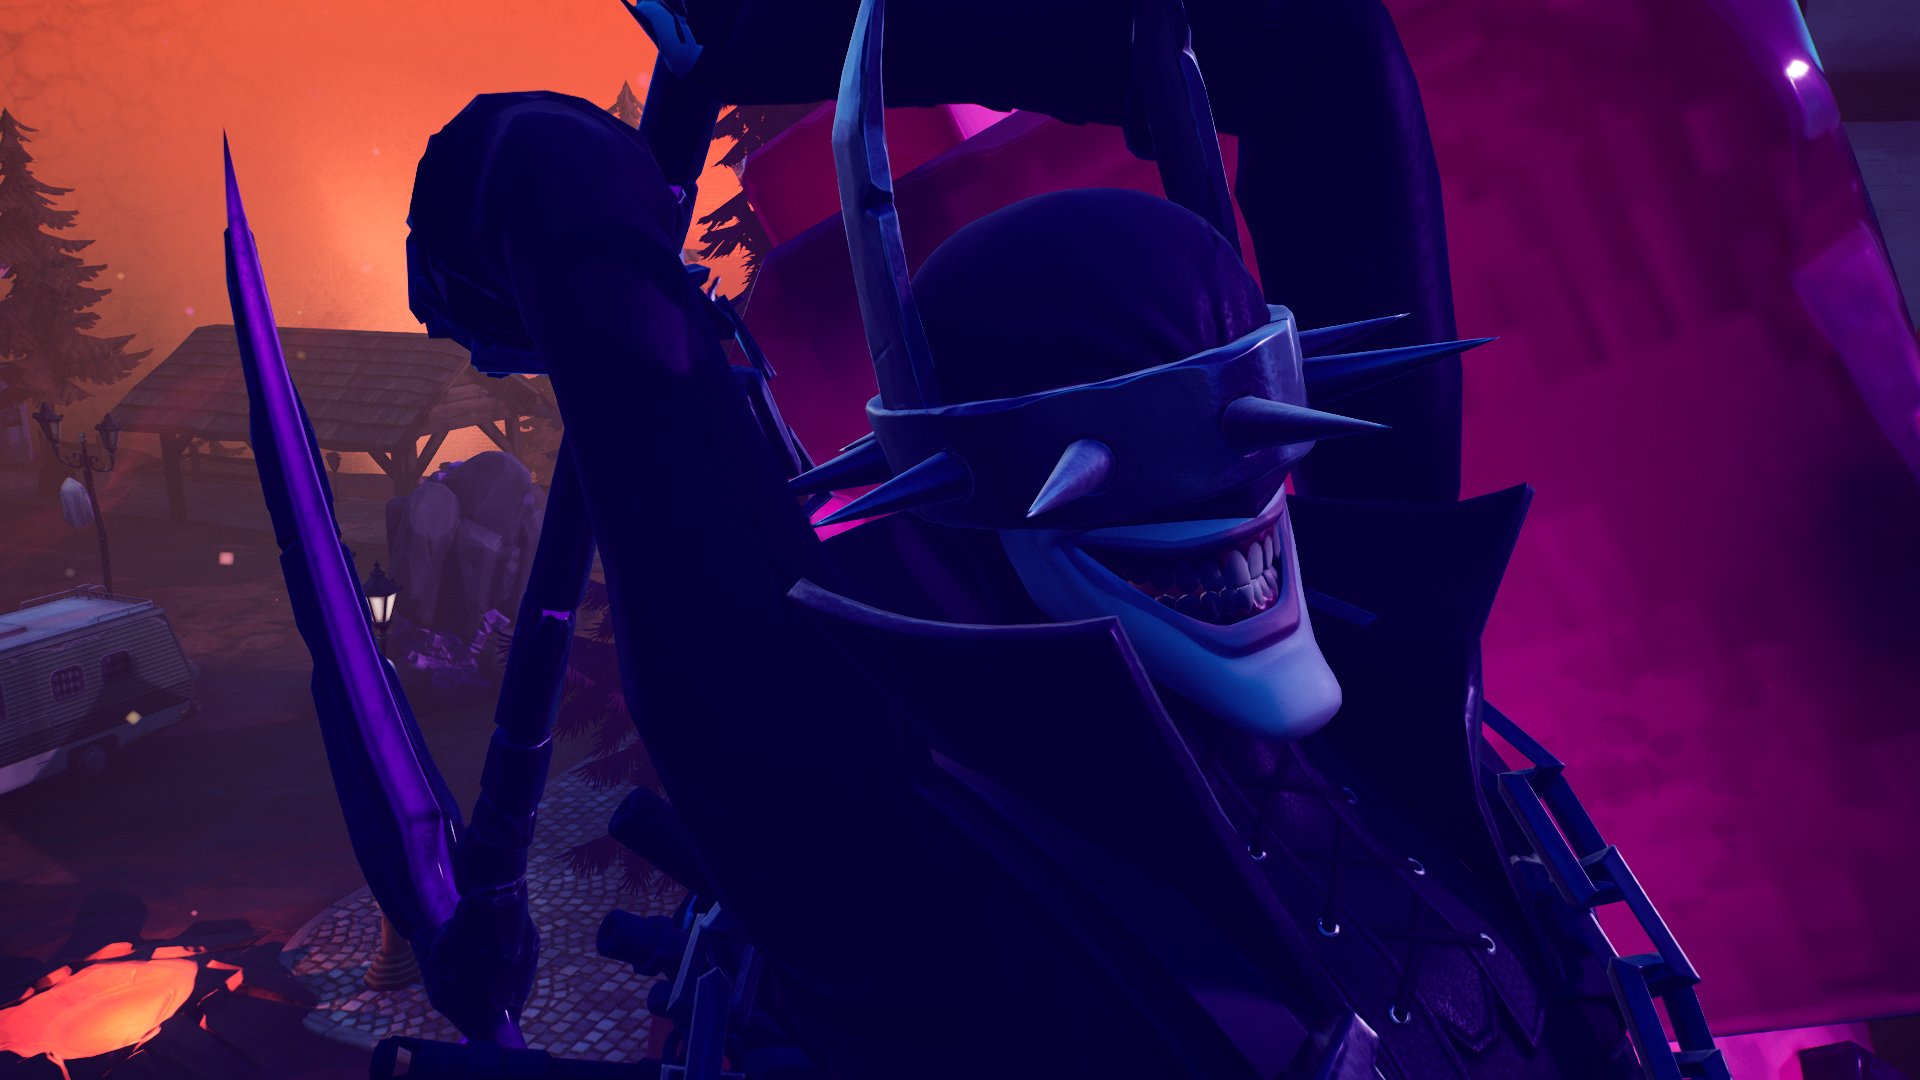 The Batman Who Laughs Fortnite Wallpapers